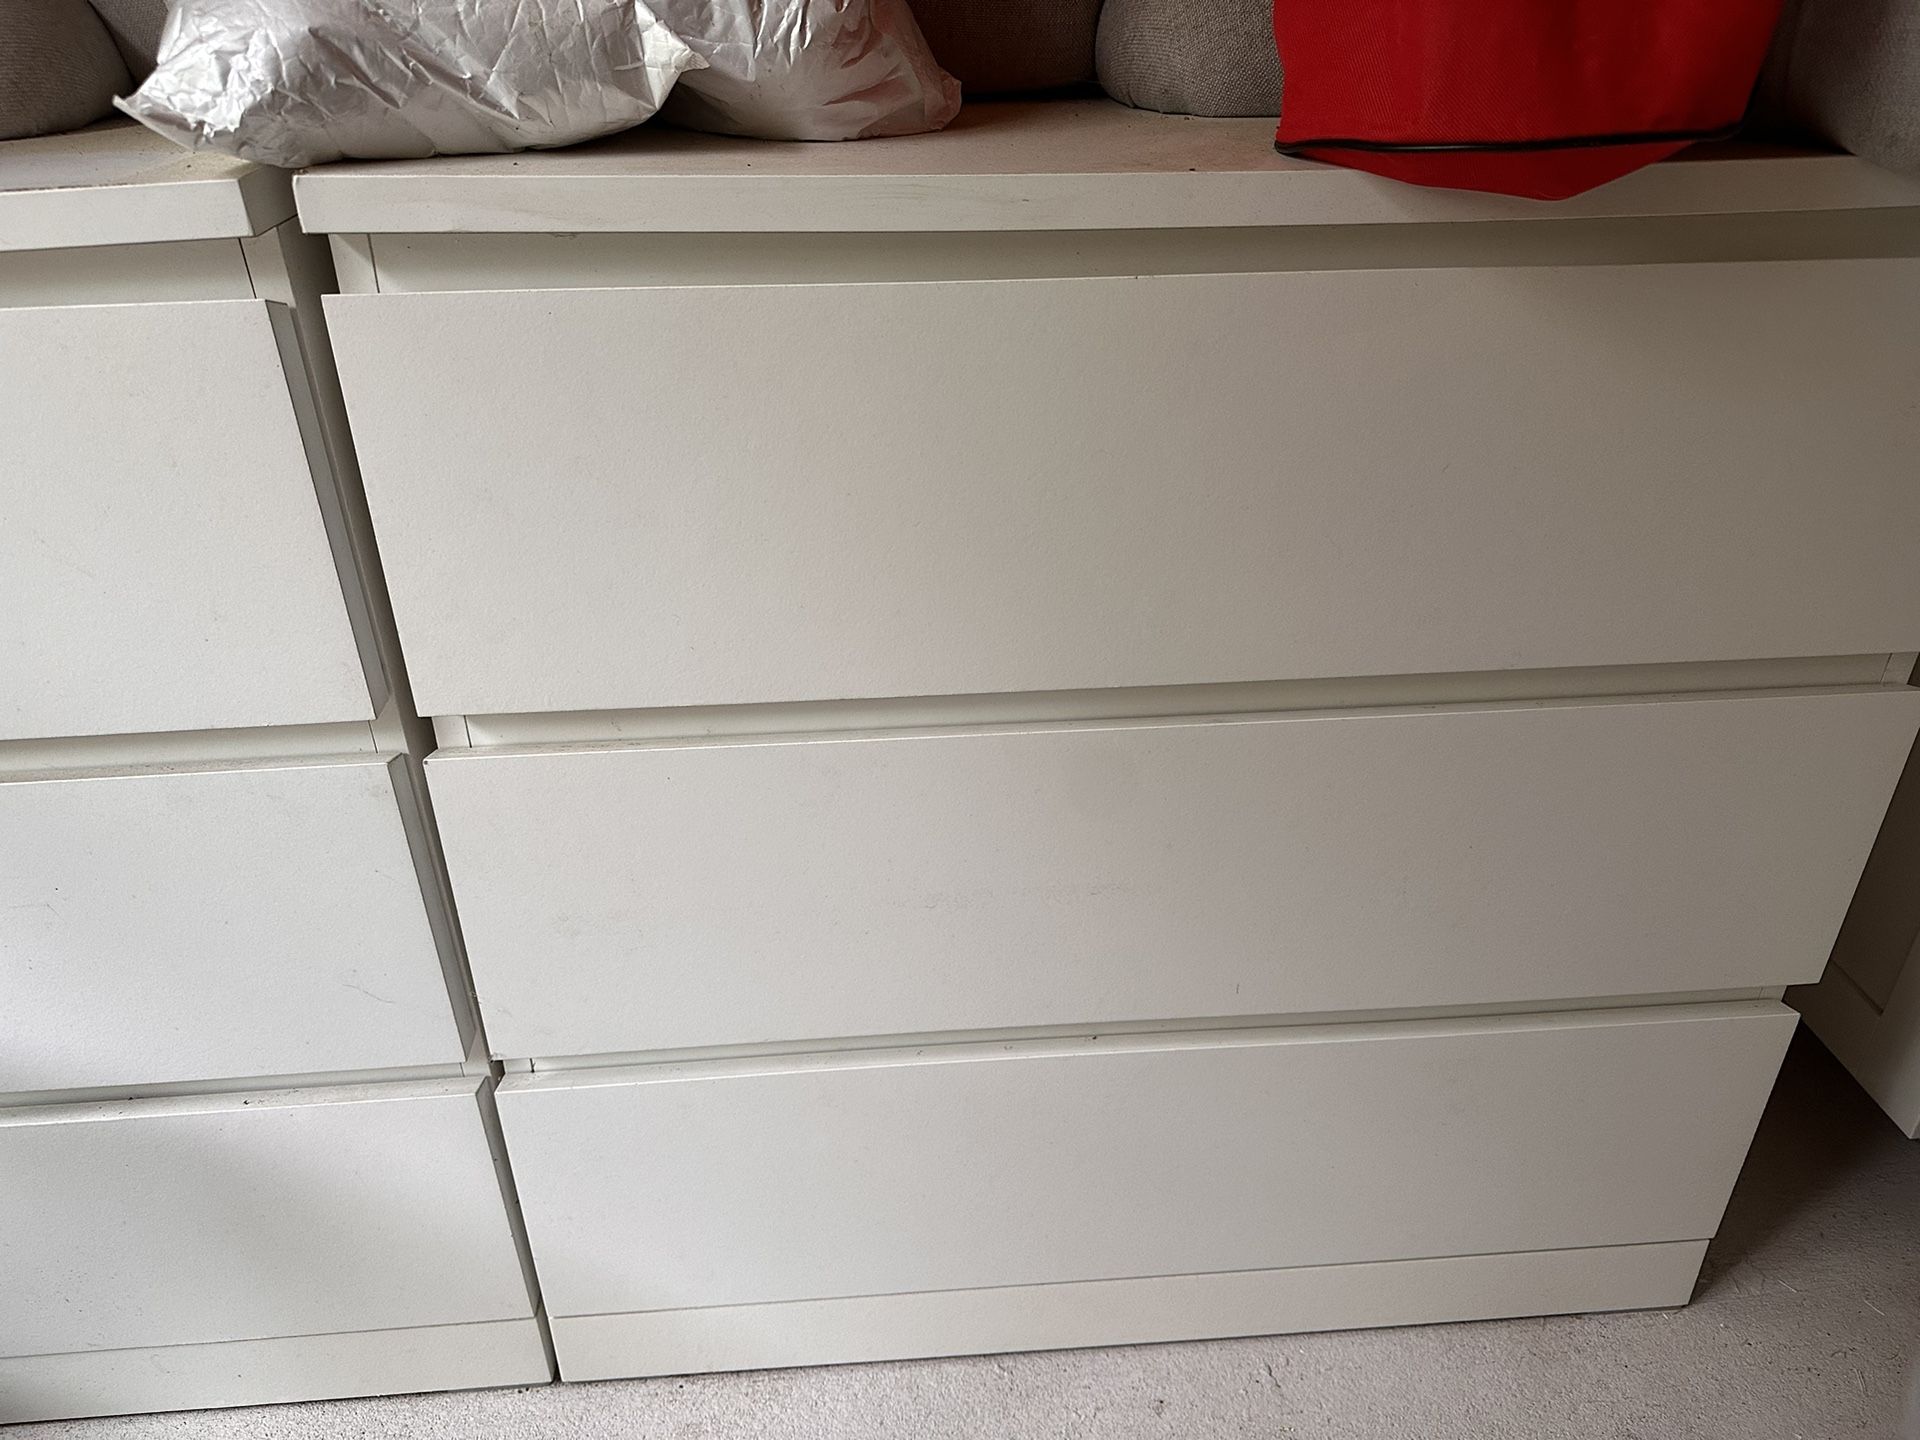 (2) 4 Drawer Dressers $150 For Both Or BO